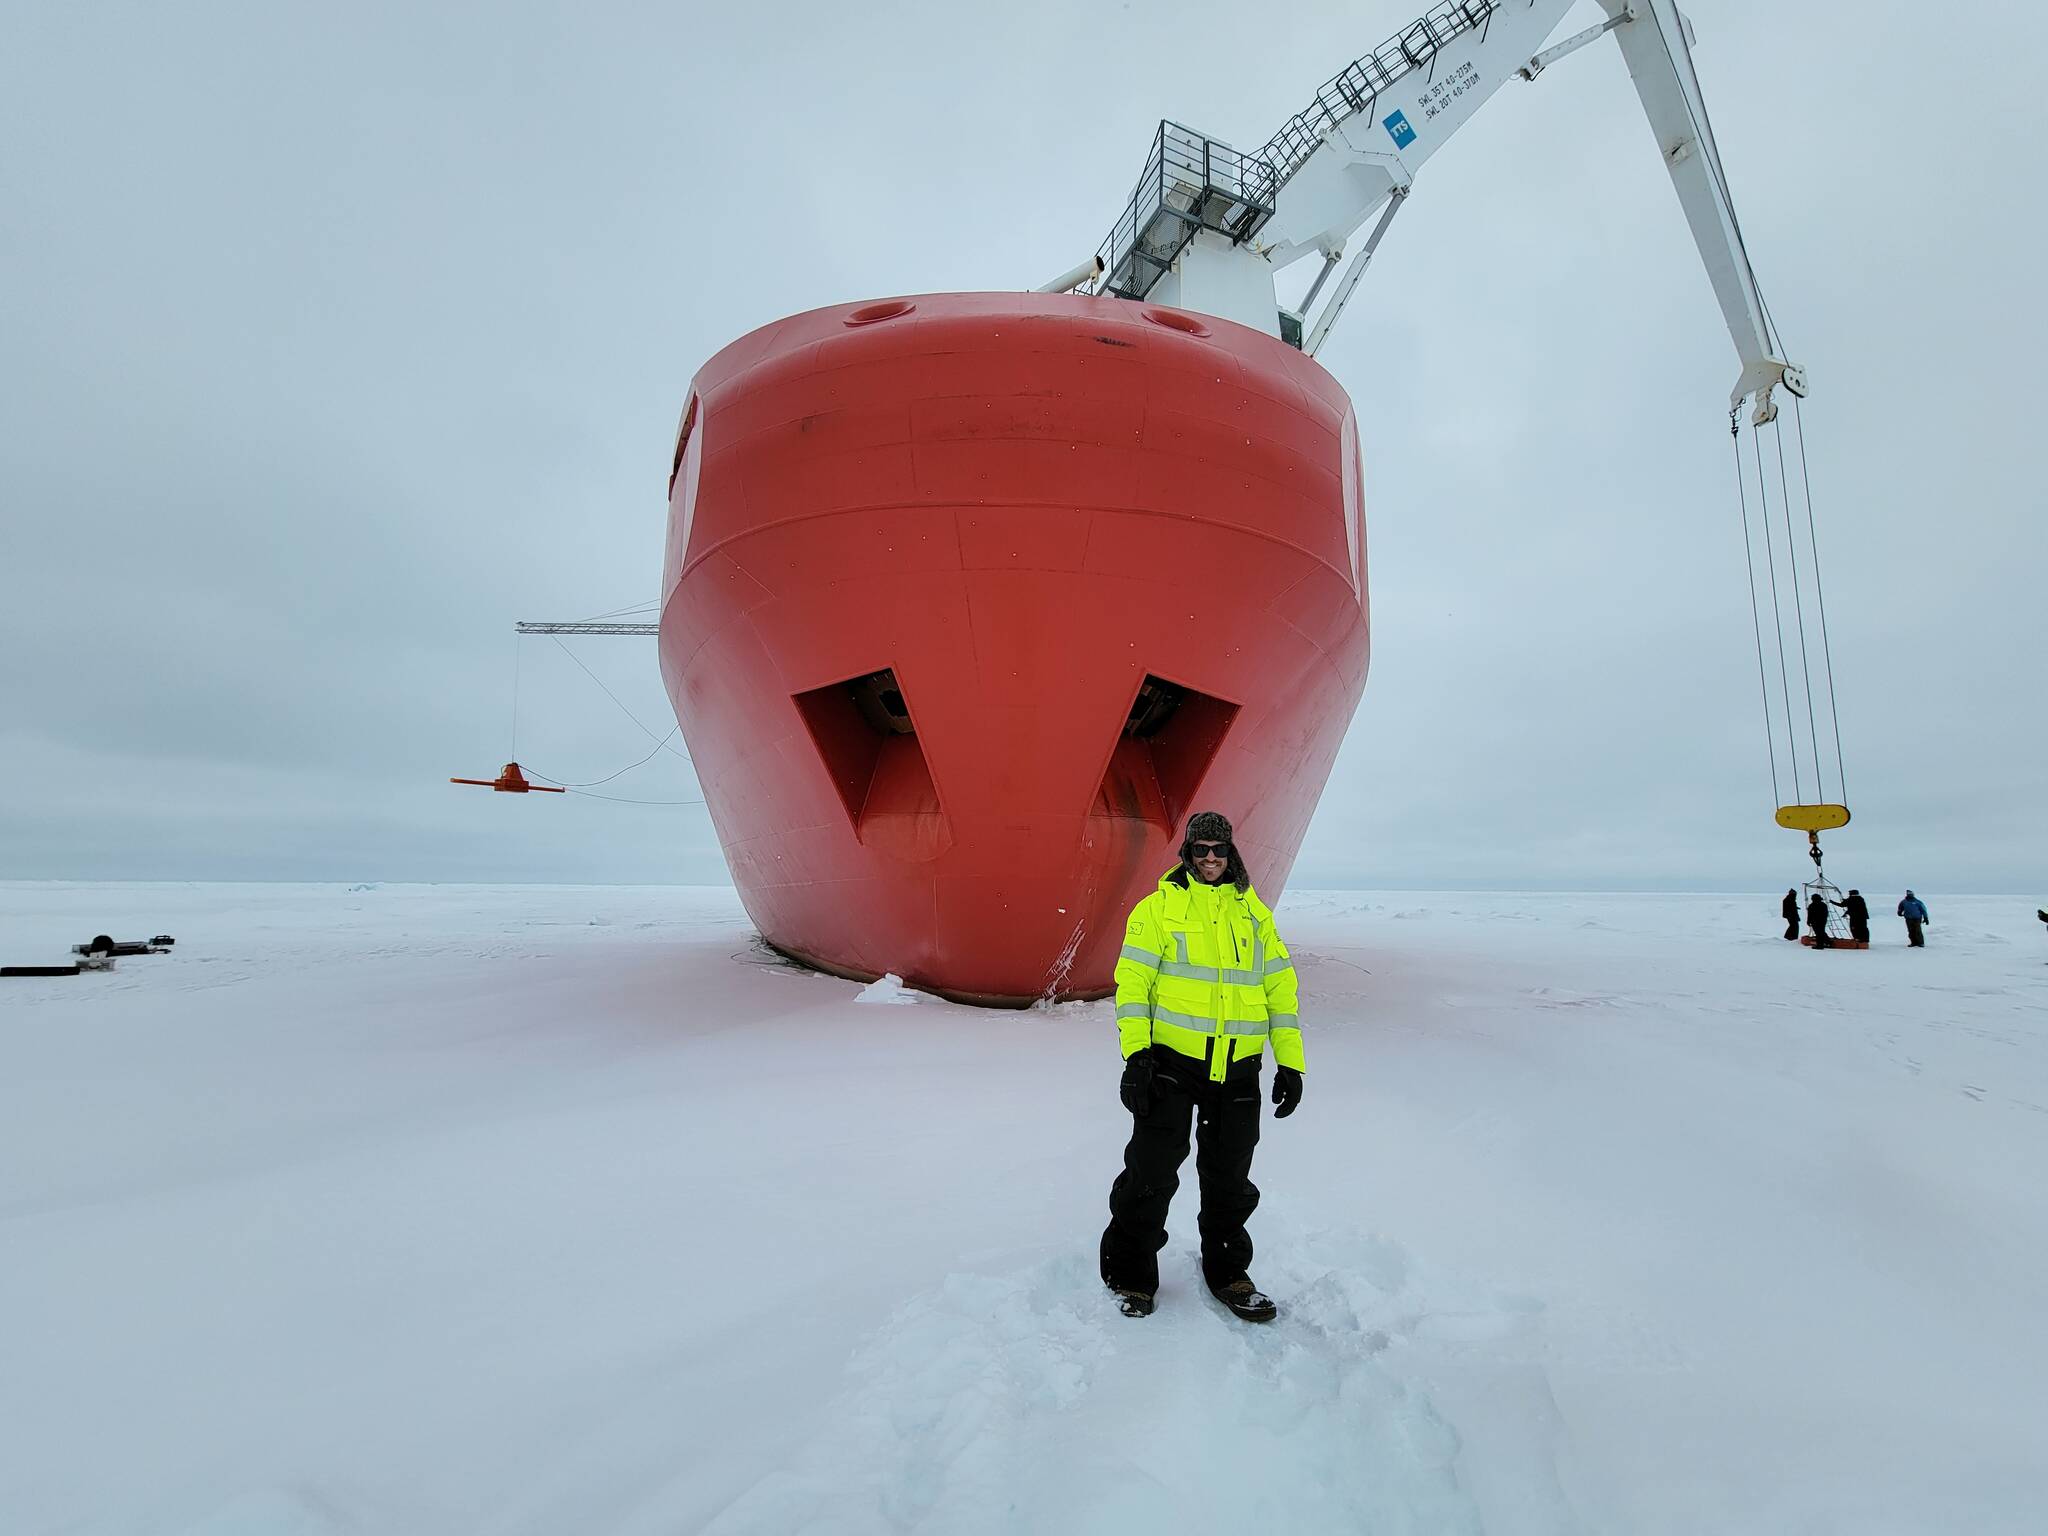 Michael Patz, raised in Juneau and part of the expedition to find the wreck of Ernest Shackleton’s vessel, the Endurance, stands in front of the bow of the S.A. Agulhas II, the expedition’s icebreaker. (Courtesy photo / Michael Patz)